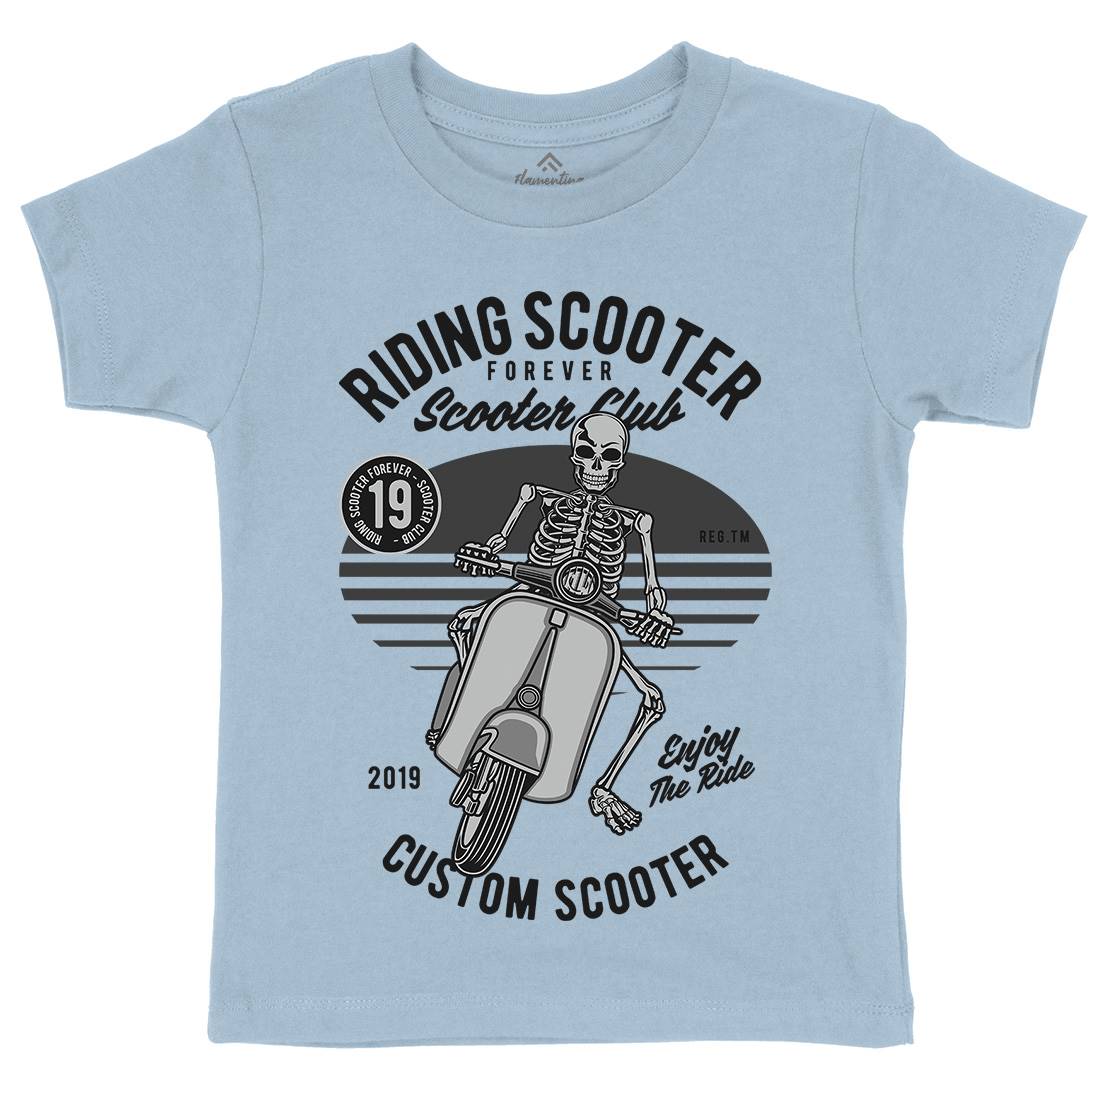 Riding Scooter Kids Crew Neck T-Shirt Motorcycles D570